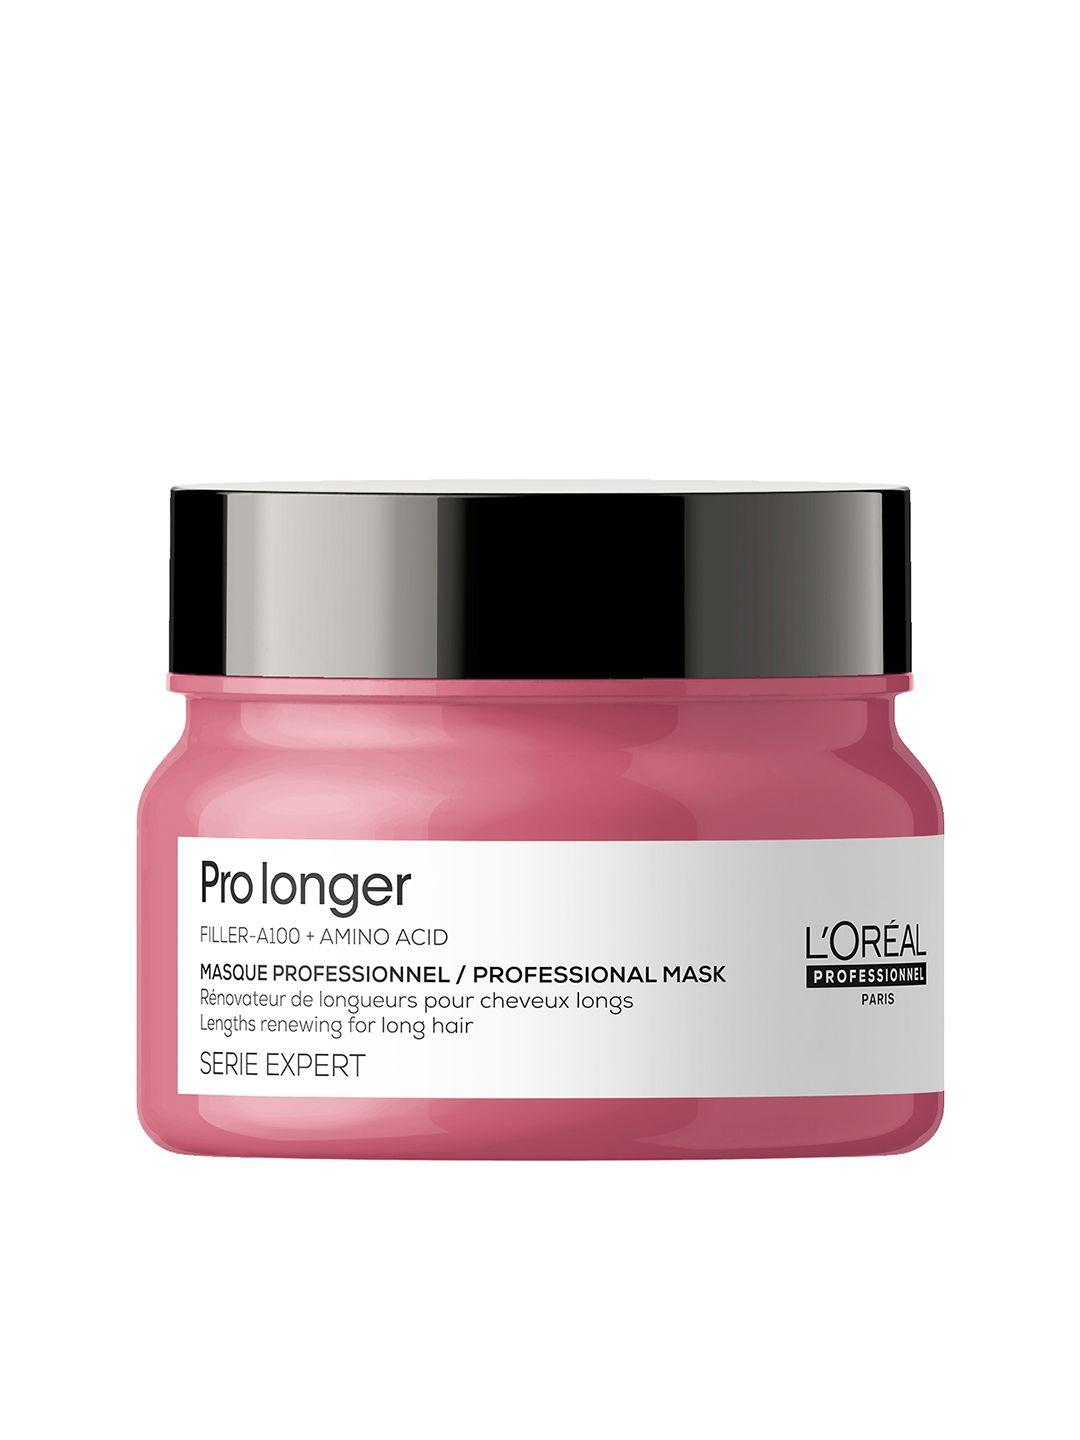 loreal professionnel pro longer hair mask with amino acids for thin hair ends-200g